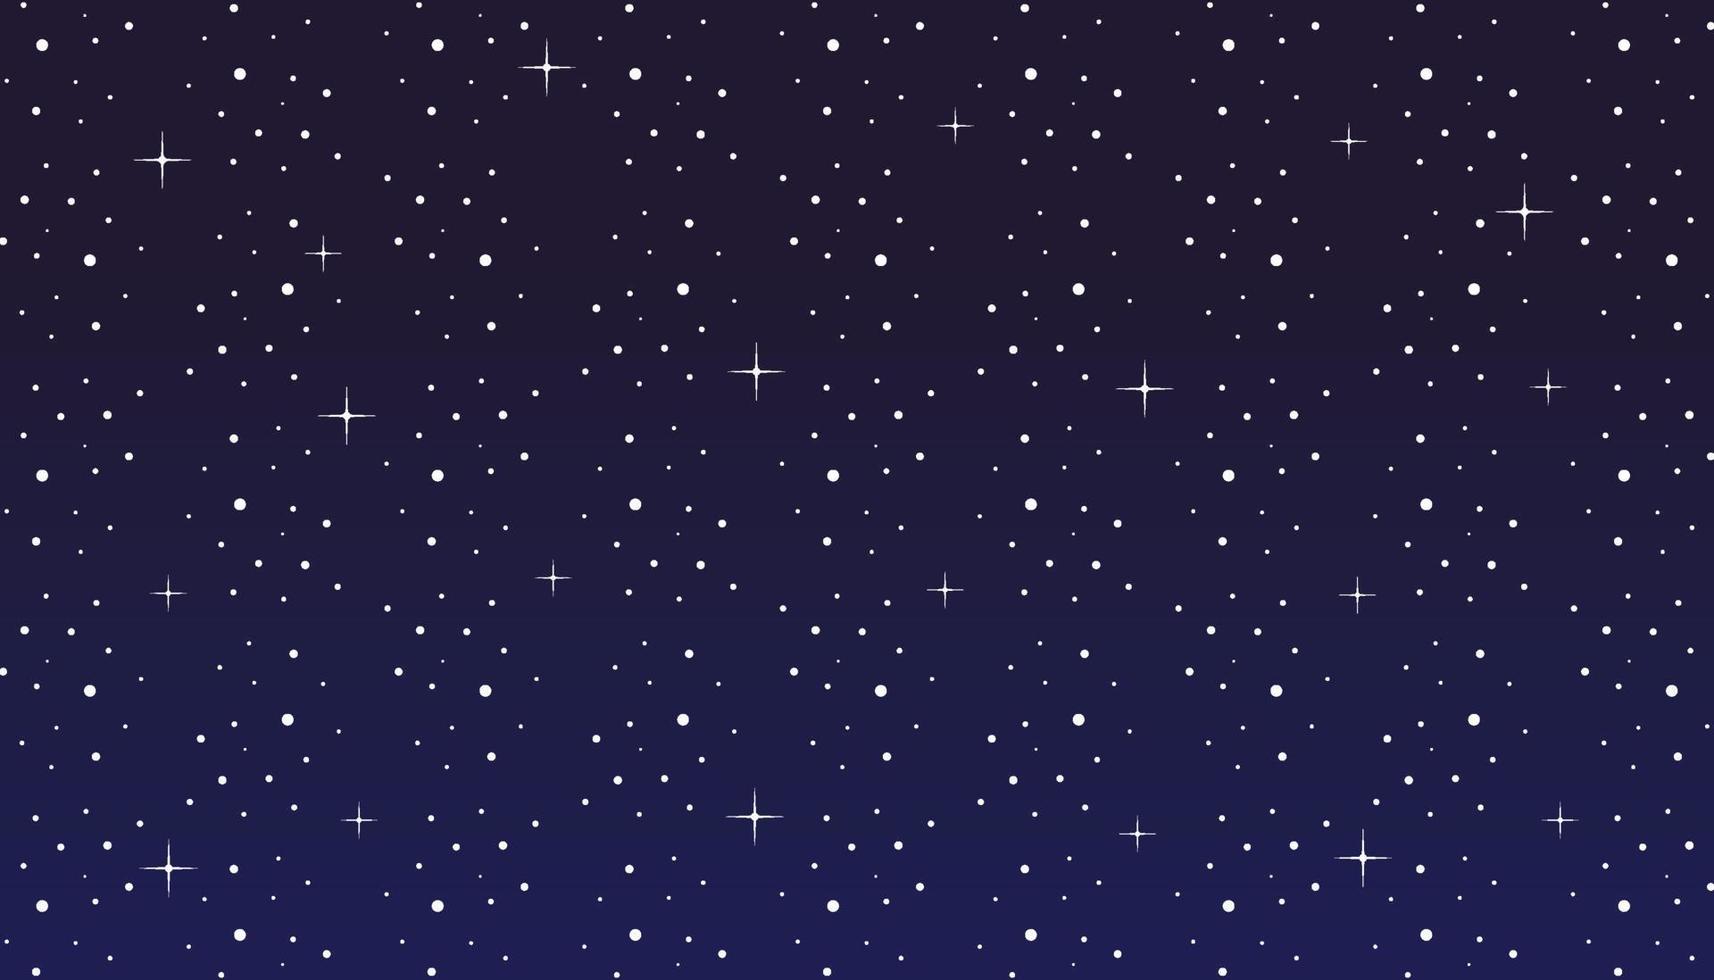 Night sky with star background vector